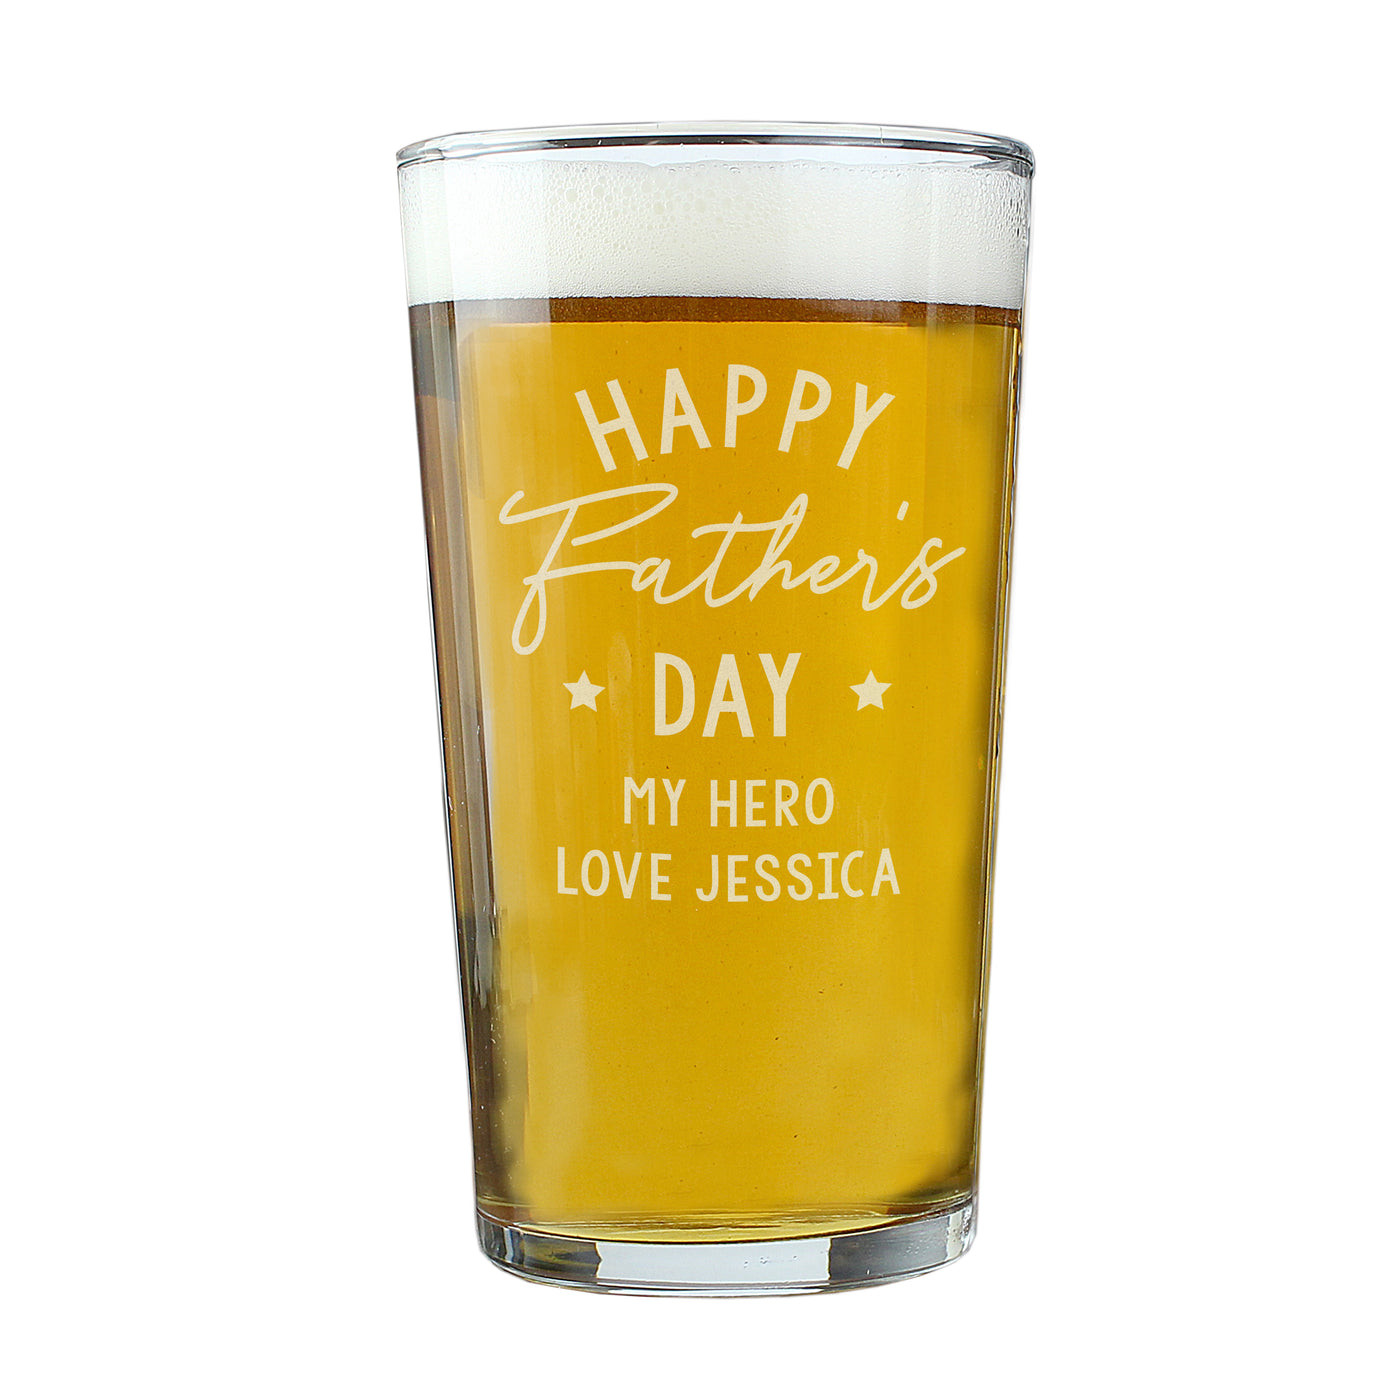 Personalised Time For A Reinbeer Pint Glass